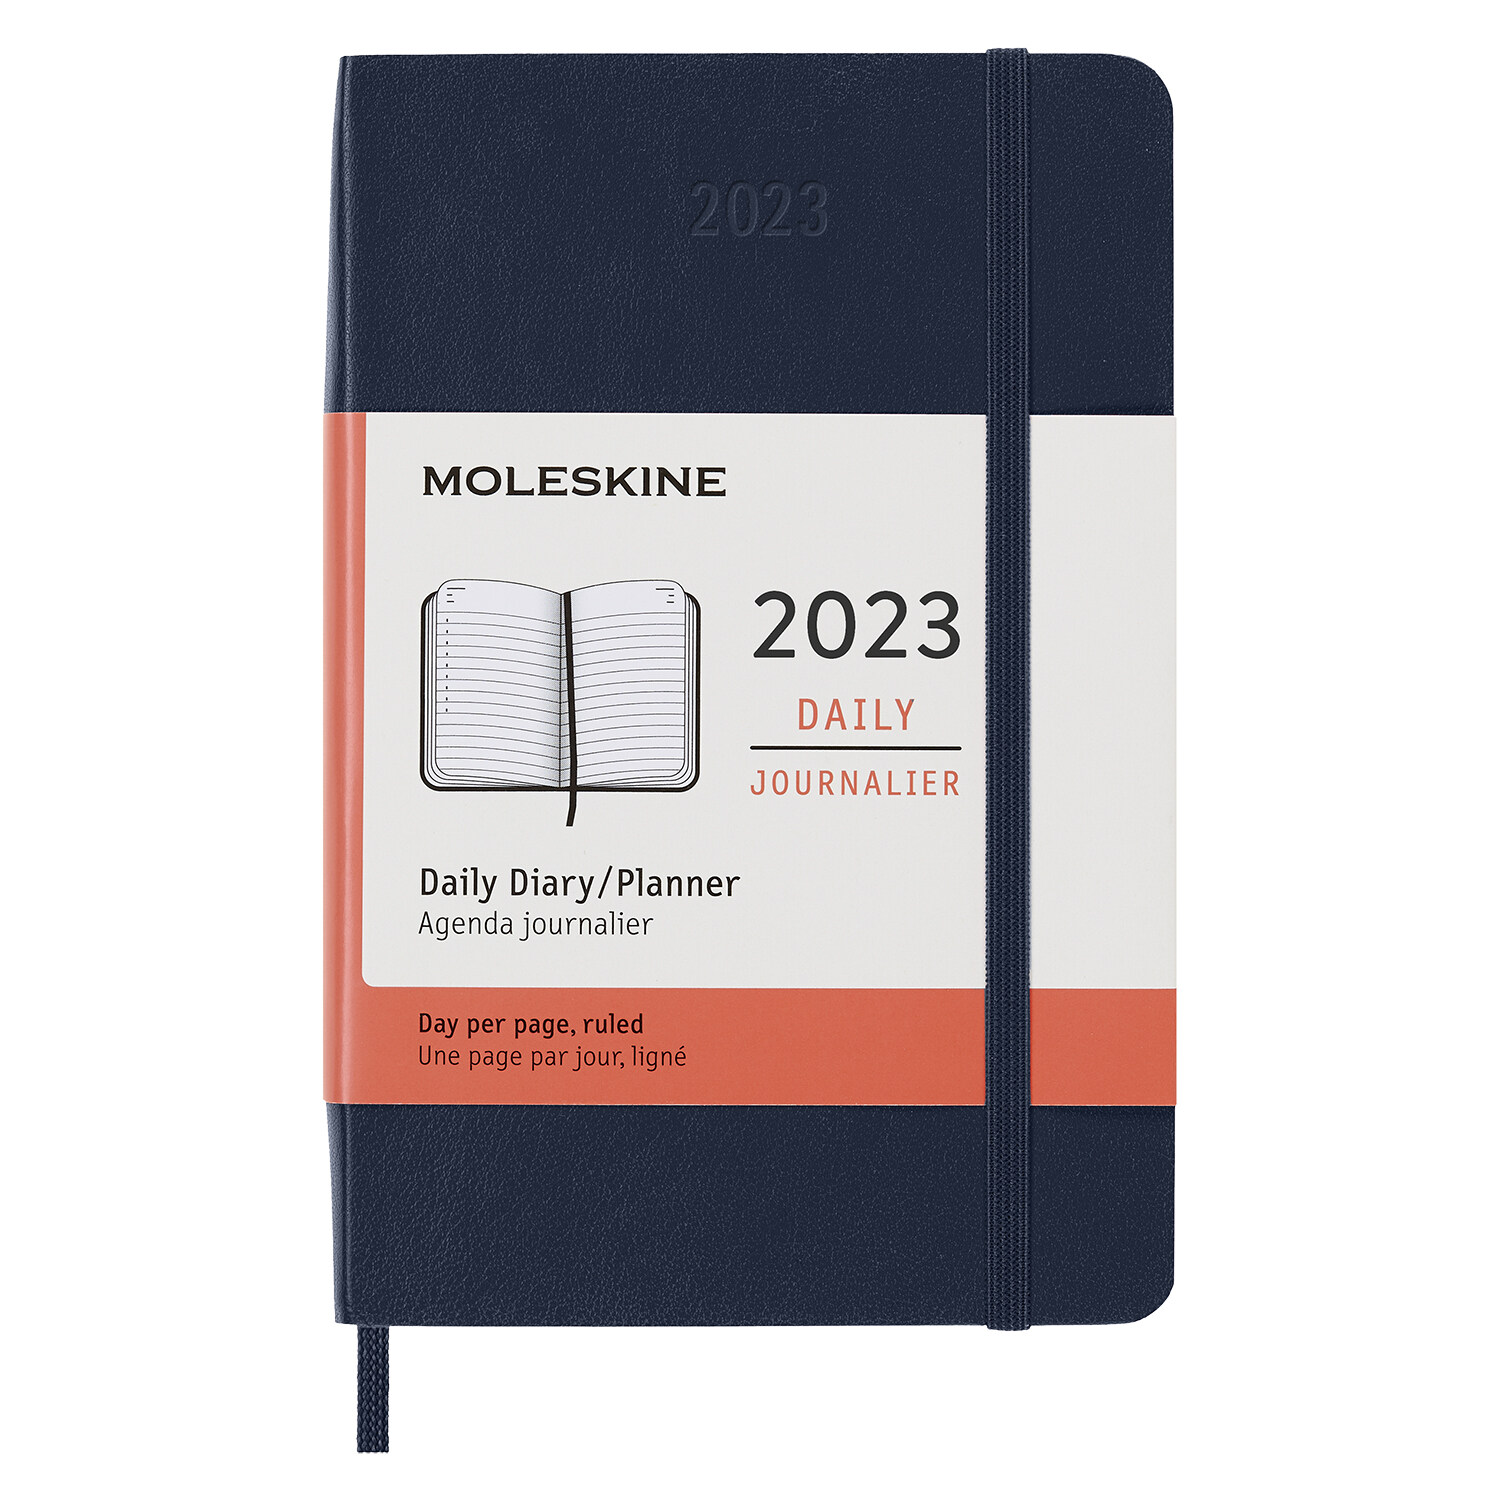 Moleskine 2023 Daily Planner, 12m, Pocket, Saphire Blue, Soft Cover (3.5 X 5.5) (Other)